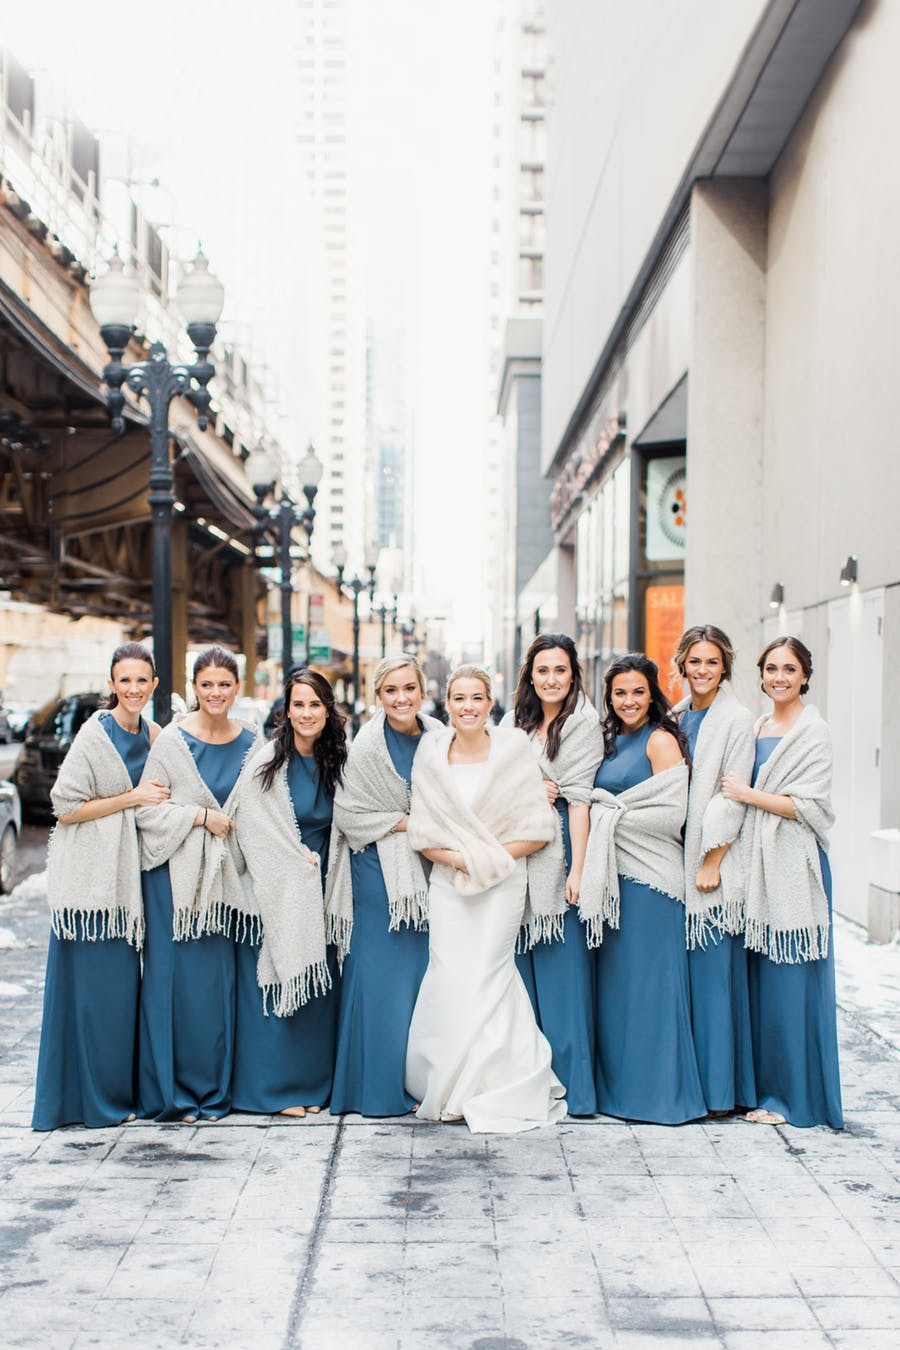 The bridesmaids were rocking muted blue dresses and covered up with pashminas